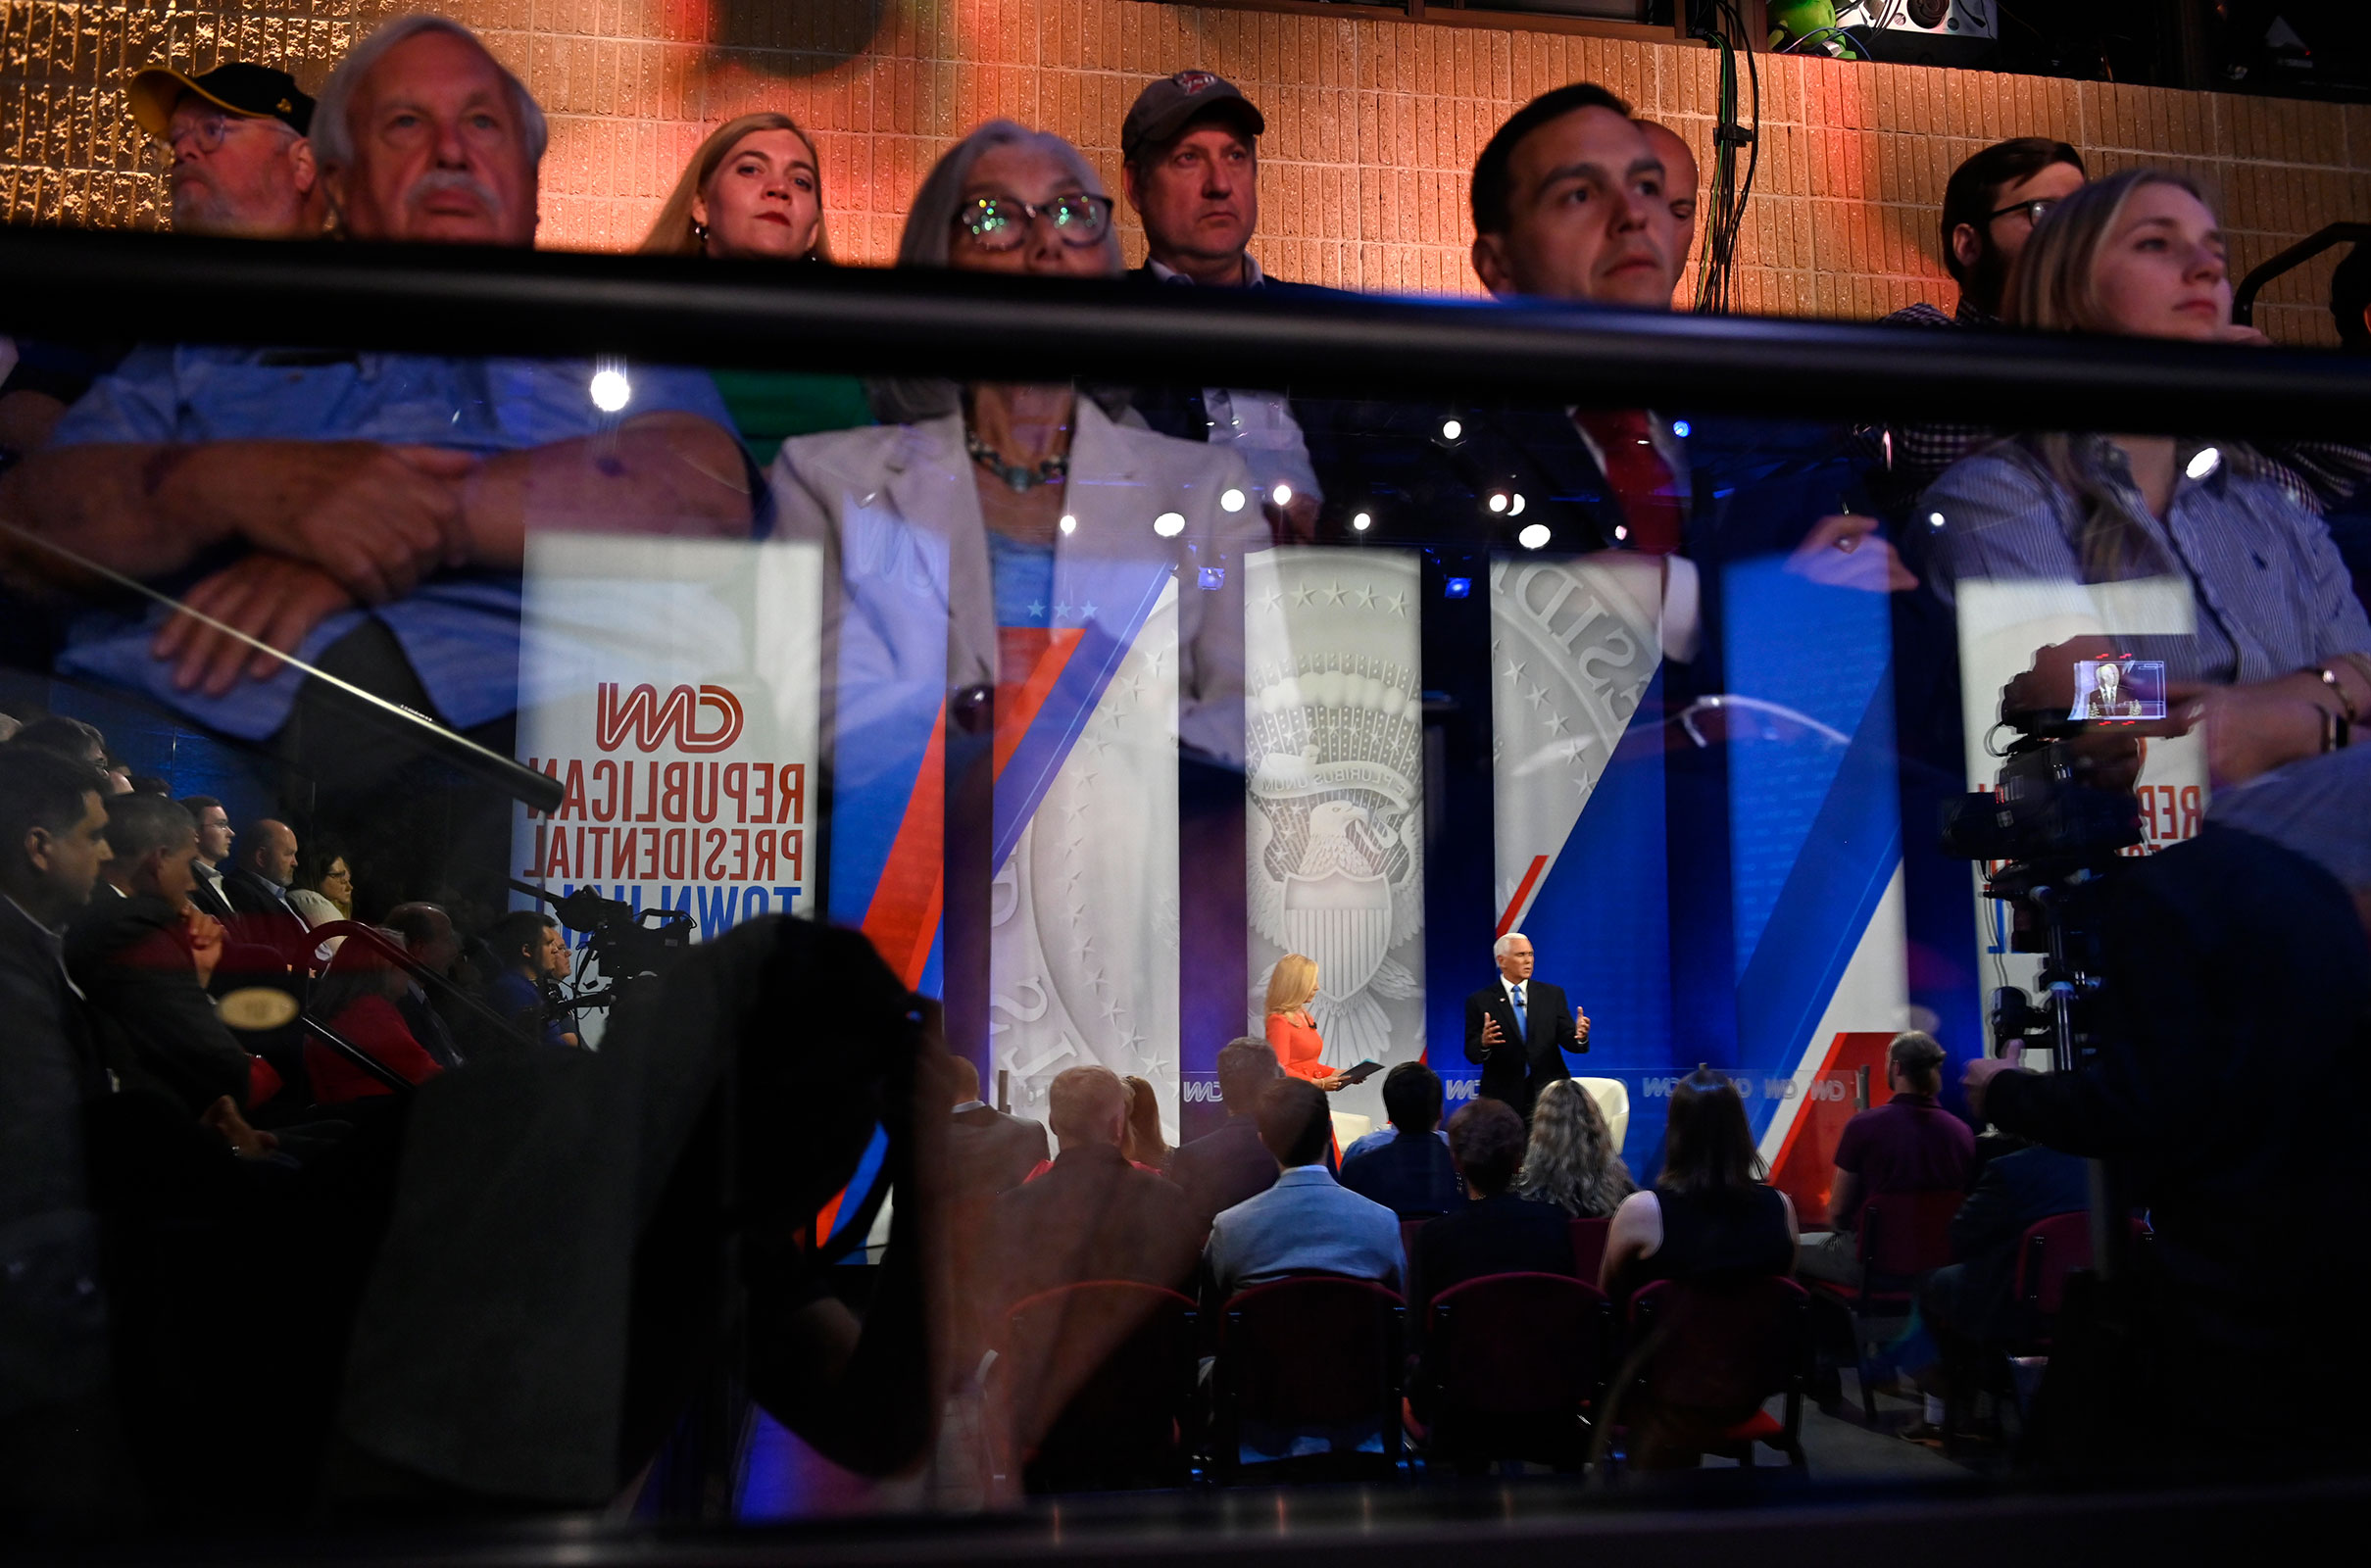 Mike Pence, reflected in the glass, participates in the town hall as audience members listen. 